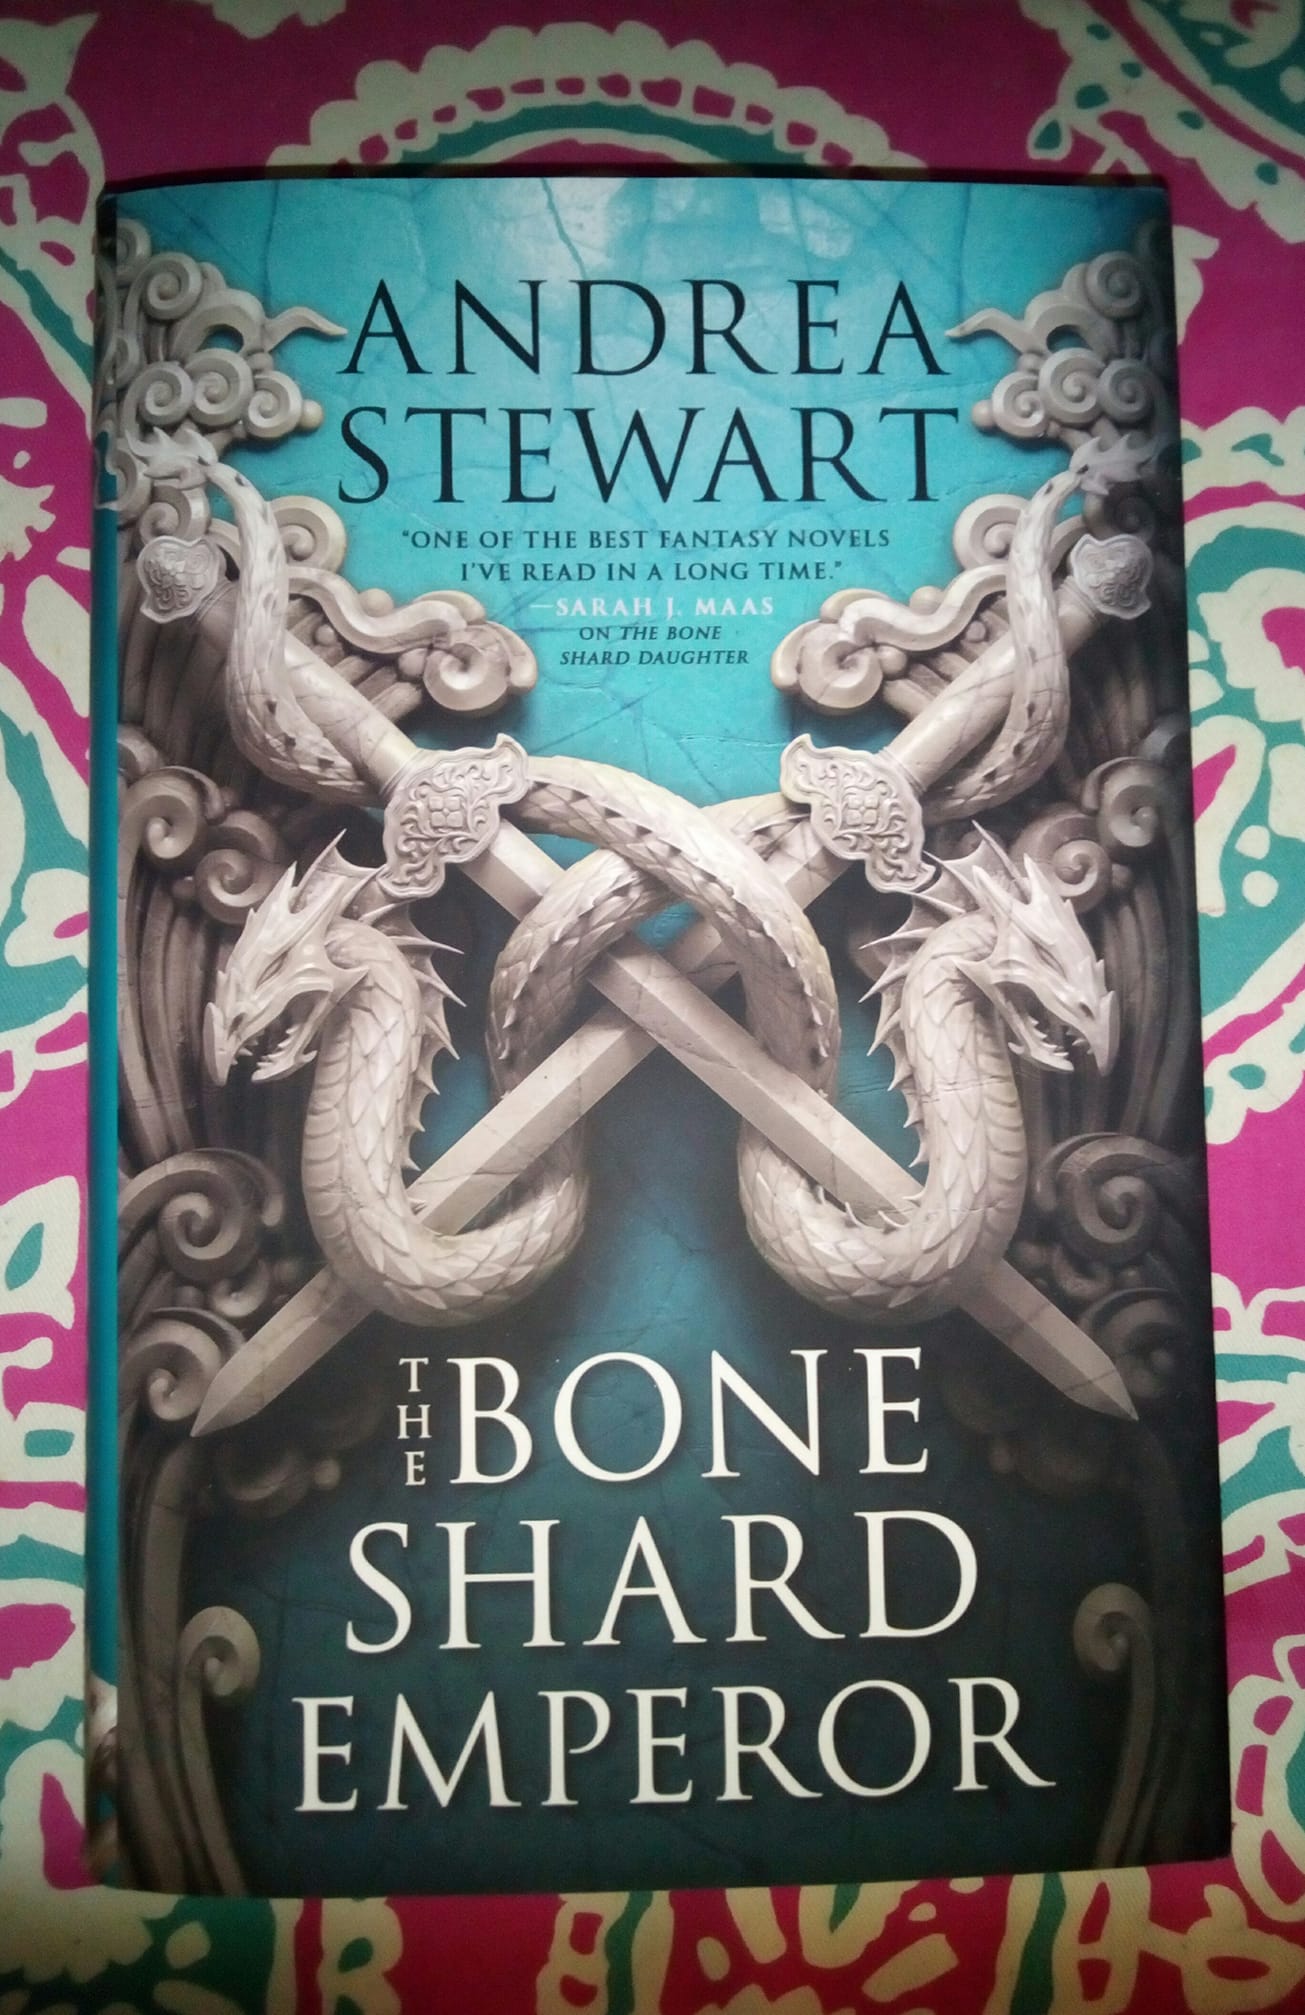 Review of The Bone Shard Emperor – Layton's Book Reviews